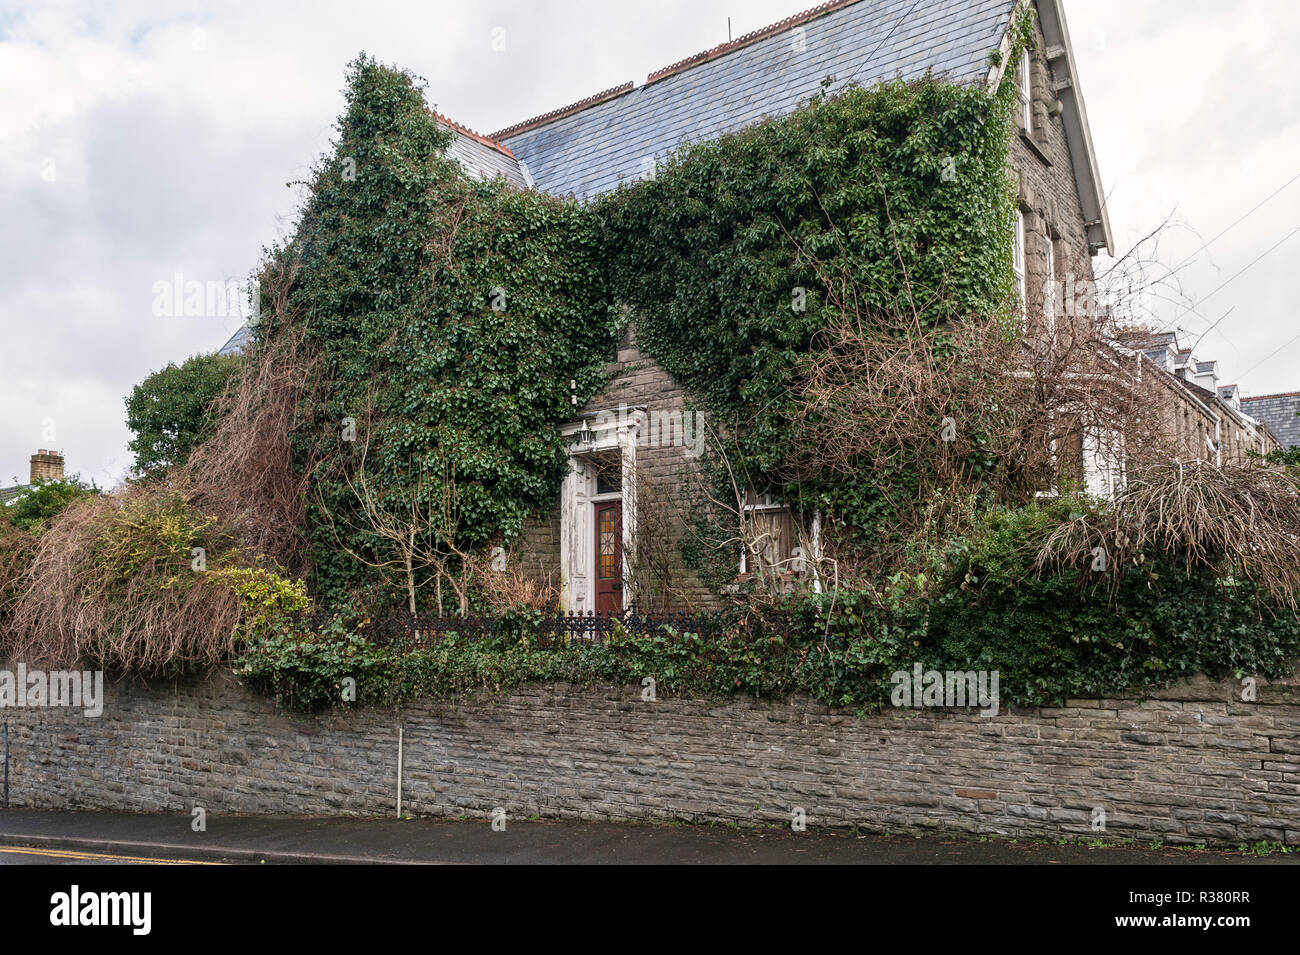 Merthyr Tydfil, South Wales, UK. An old neglected house heavily overgrown with ivy Stock Photo